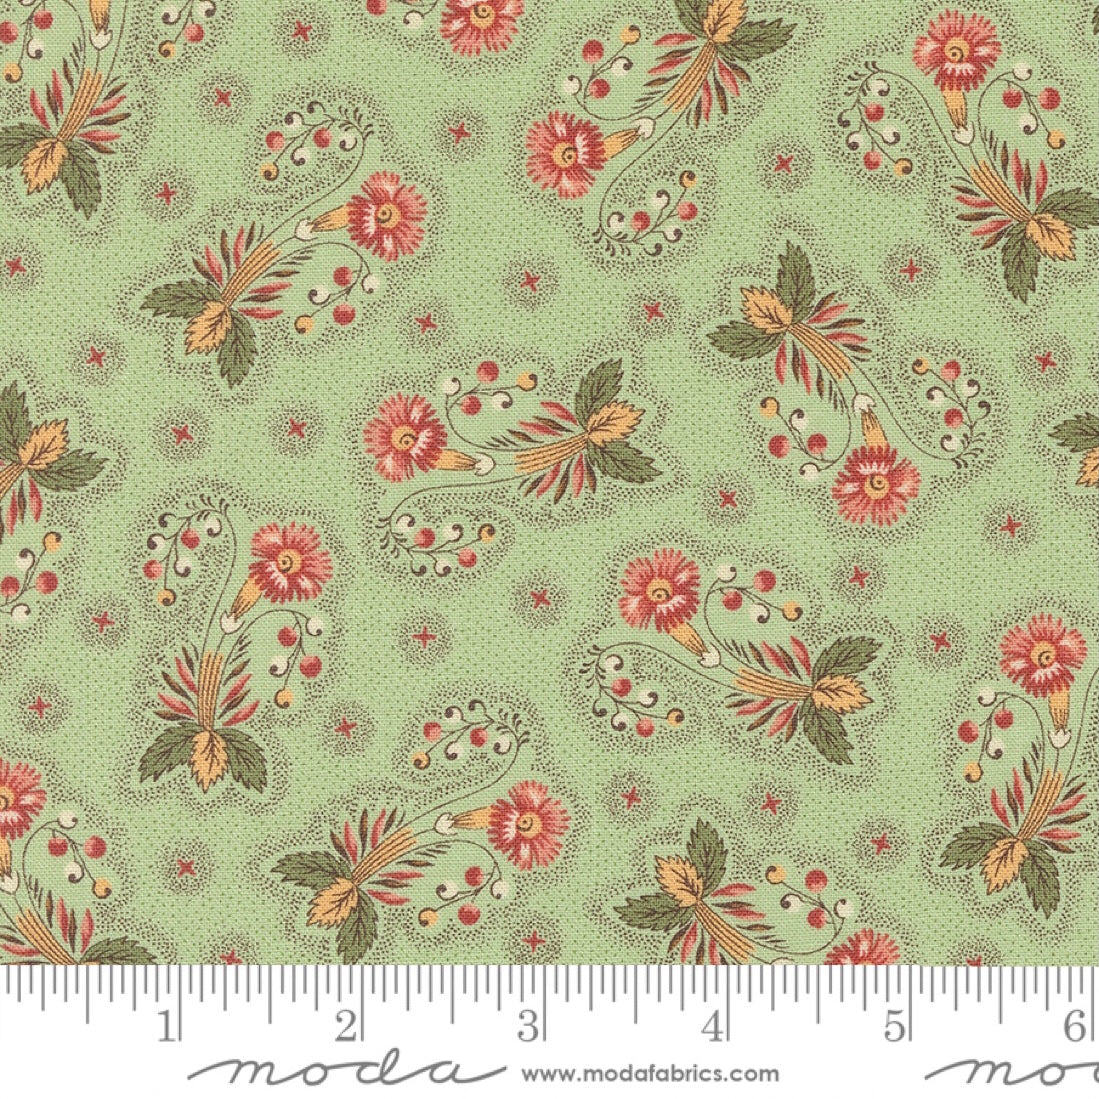 Dinahs Delight - Small Floral - Rosemary